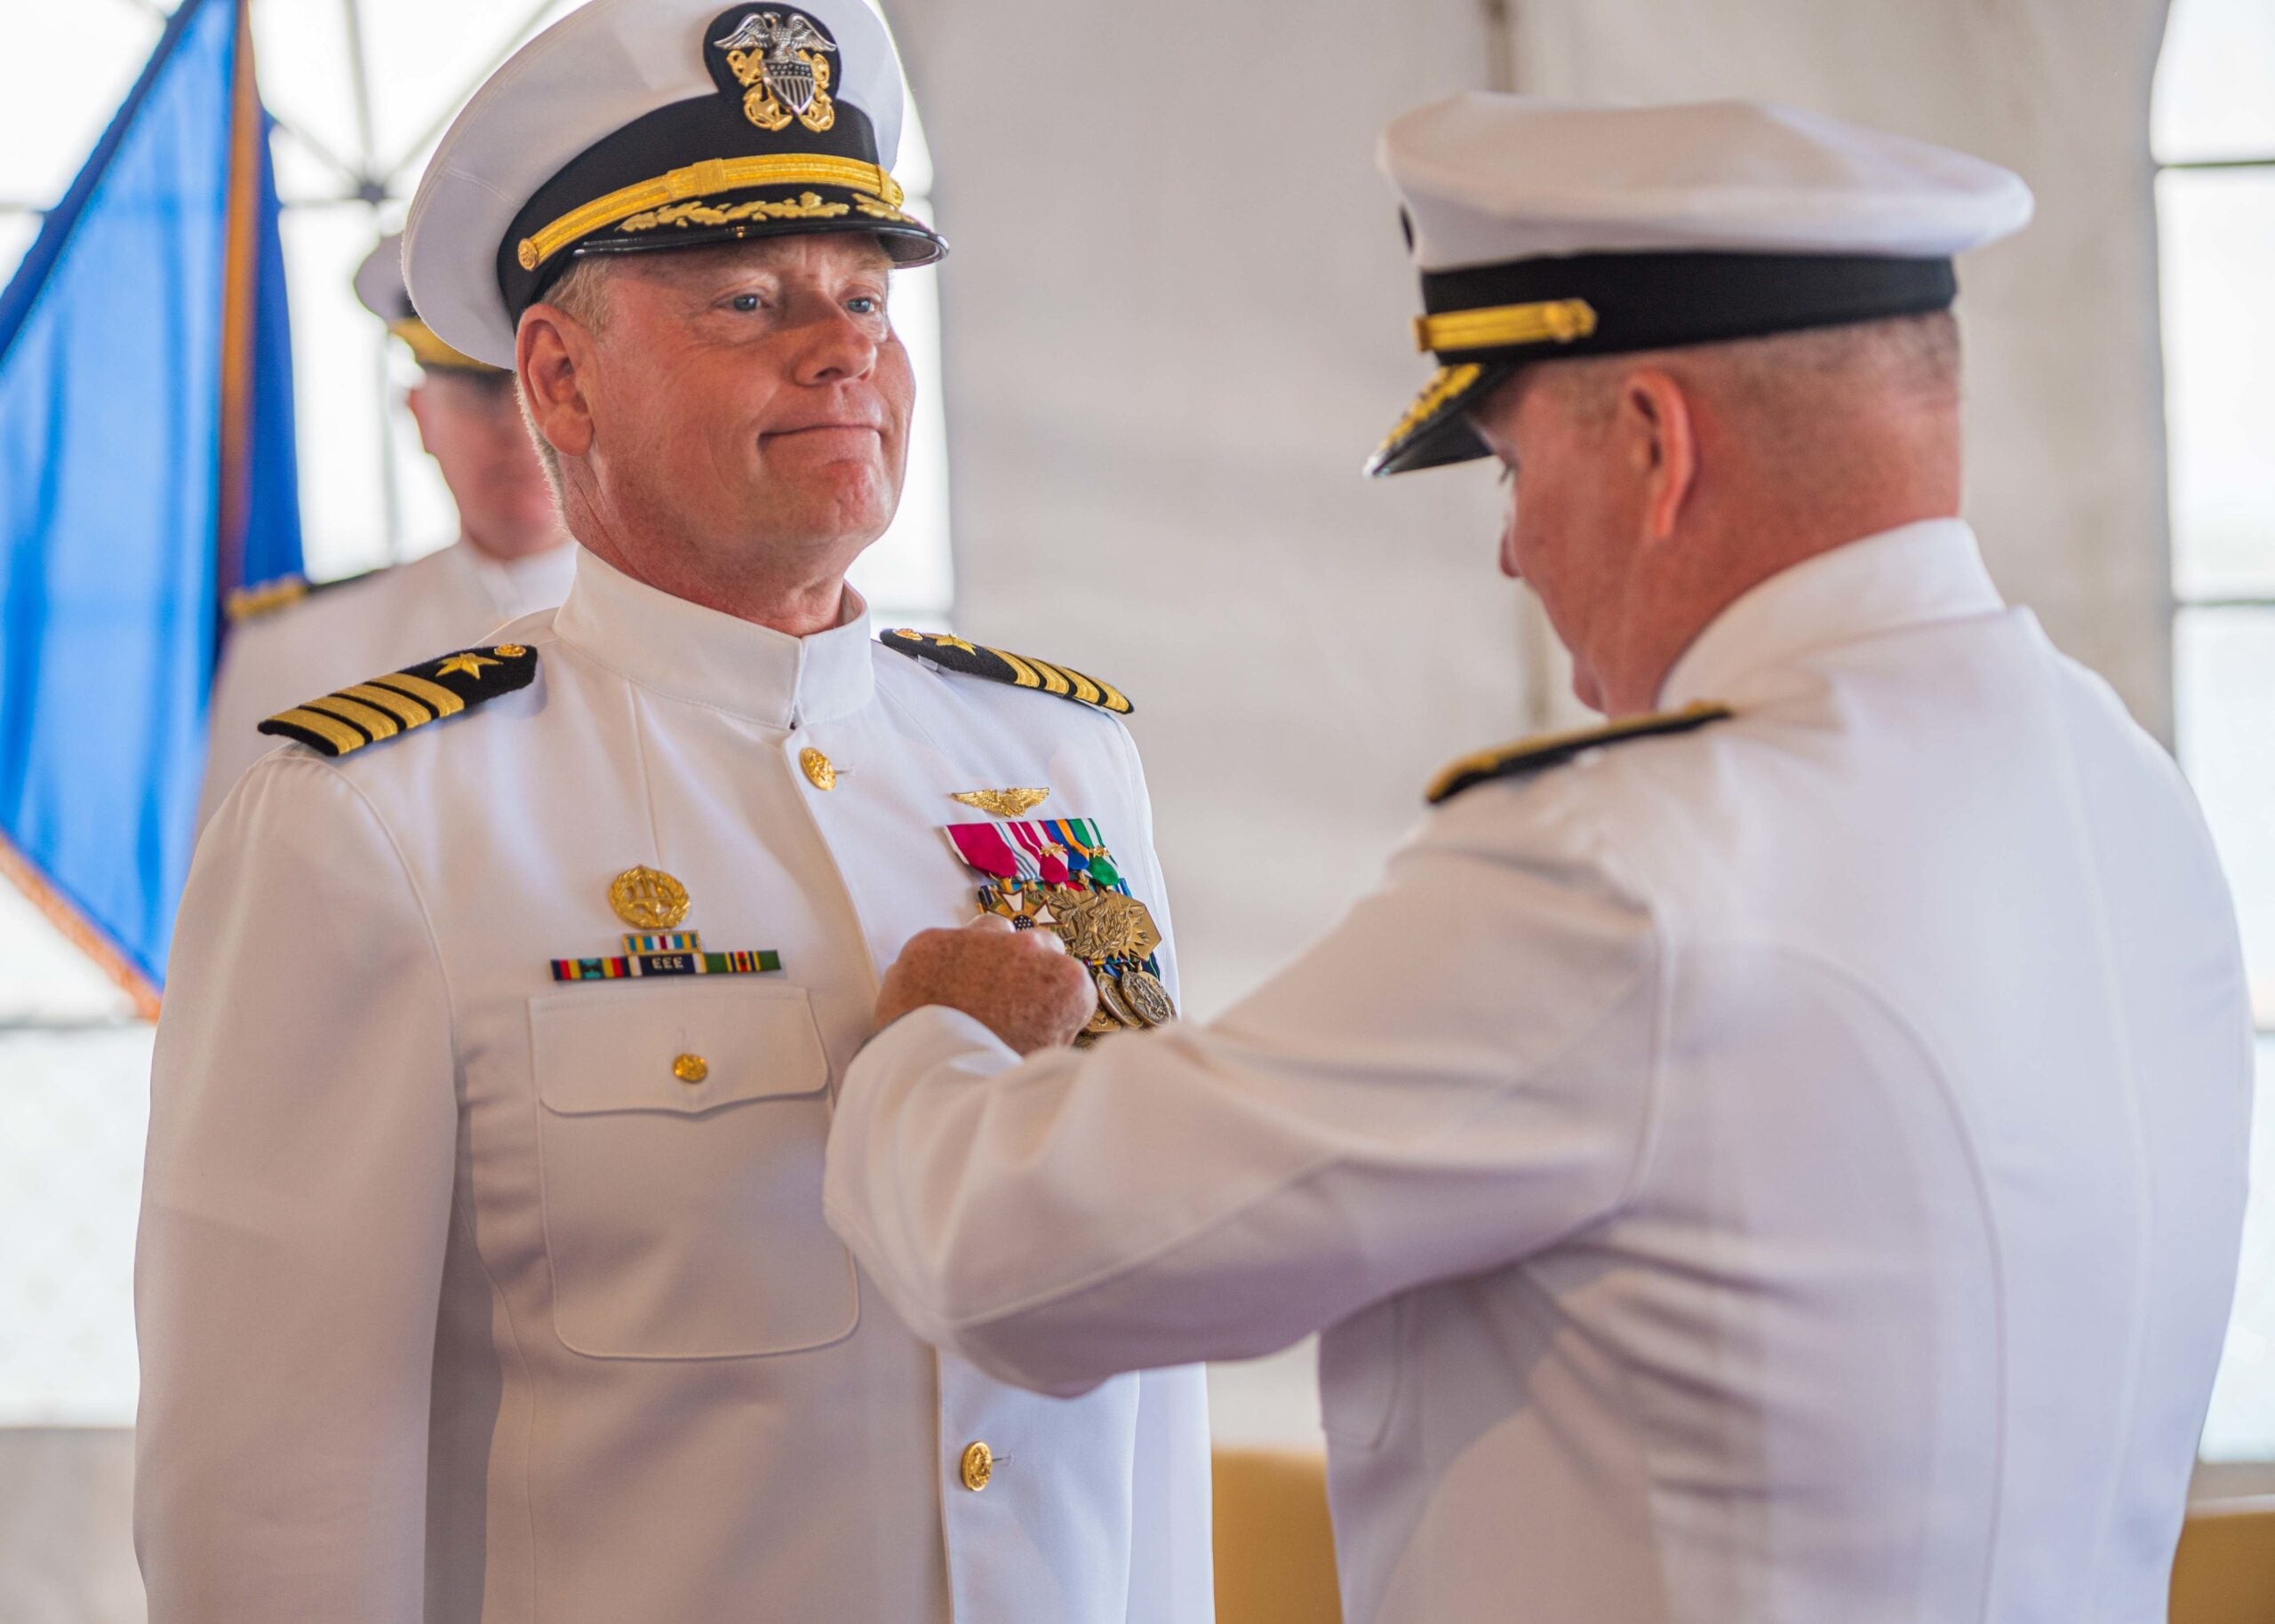 220614-N-KN989-1005 JOINT BASE PEARL HARBOR-HICKAM, Hawaii (June 14, 2022) Rear Adm. Timothy Kott, Commander, Navy Region Hawaii, presents Capt. Erik Spitzer, Commander, Joint Base Pearl Harbor-Hickam, the Legion of Merit Medal during a change of command ceremony aboard USS Missouri (BB-63). Spitzer was relieved by Capt. Mark Sohaney during the official change of command ceremony June 14, 2022. Joint Base Pearl Harbor-Hickam delivers the best service in base operating support to supported and tenant commands to enable operational mission success while simultaneously providing the highest quality of installation services, facilities support and quality of life programs.(U.S. Navy photo by Melvin J. Gonzalvo)